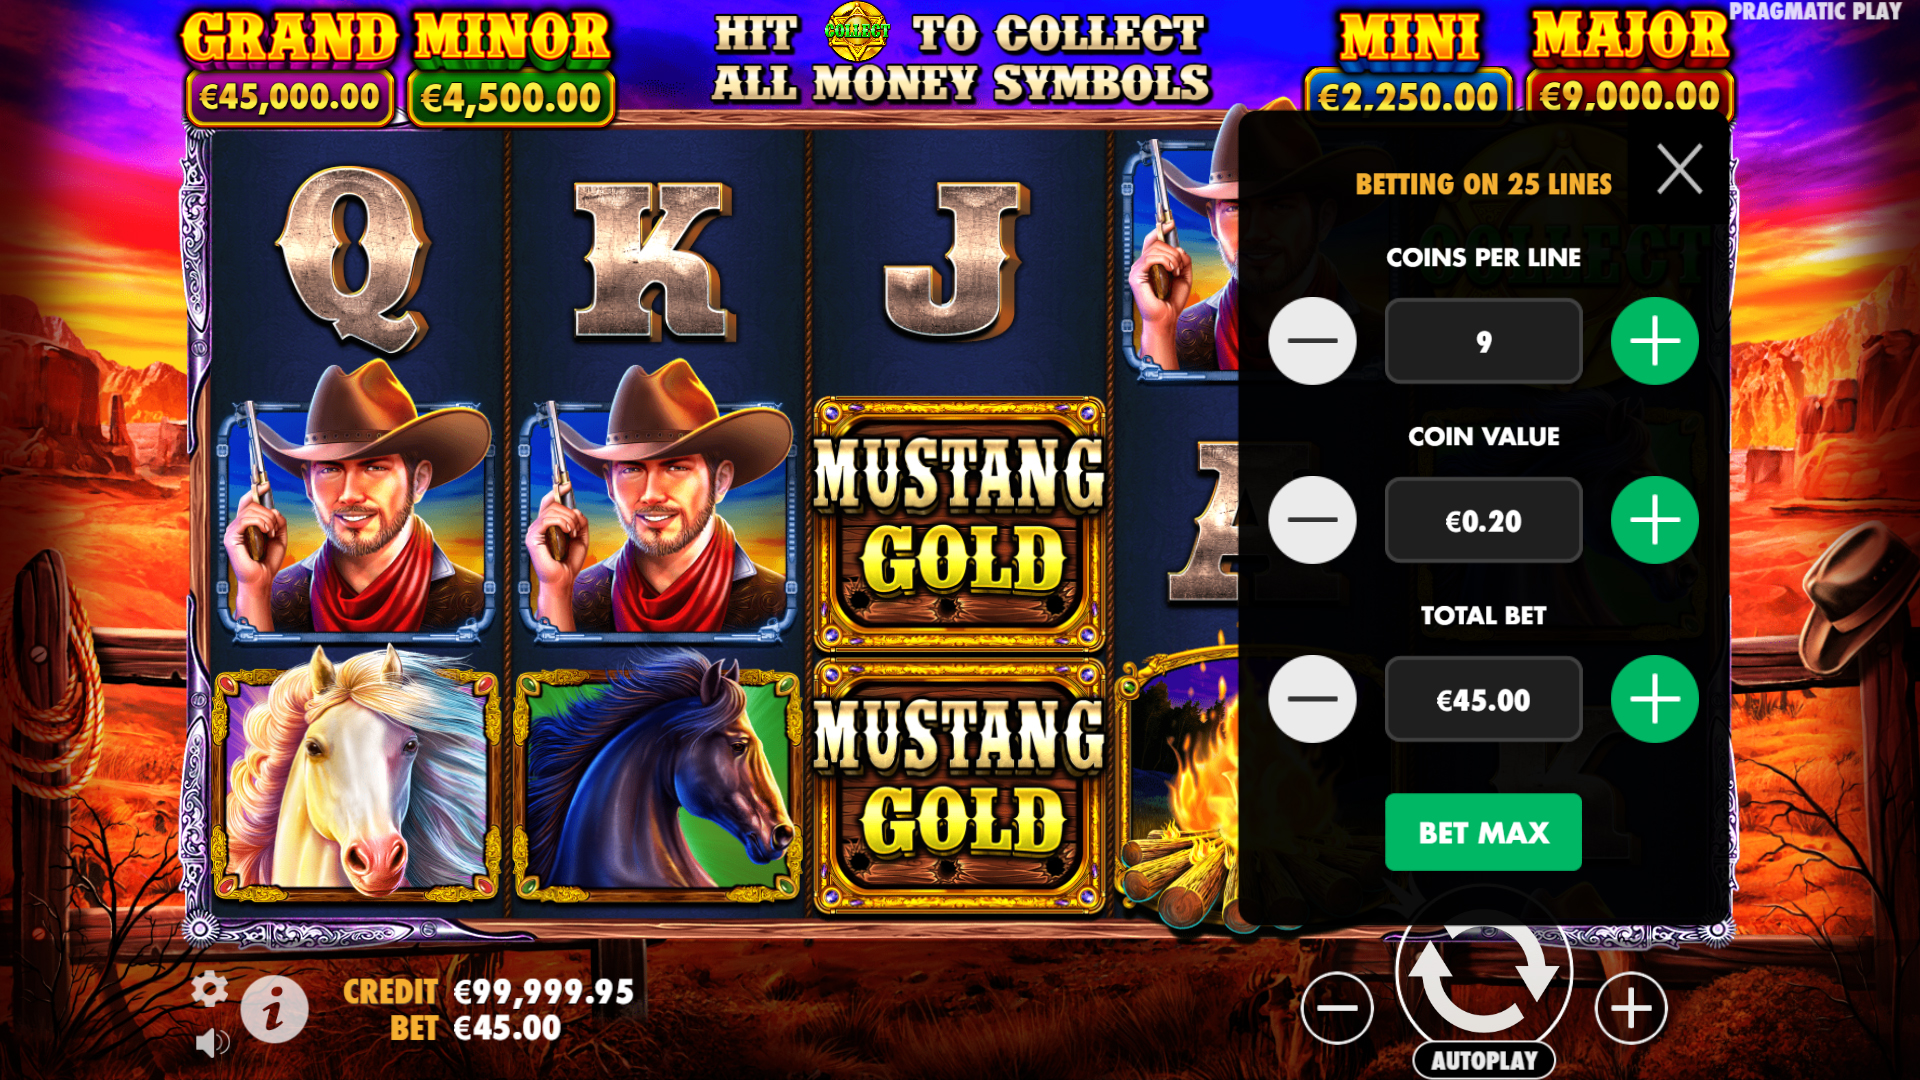 Mustang Gold slot at Mostbet online casino